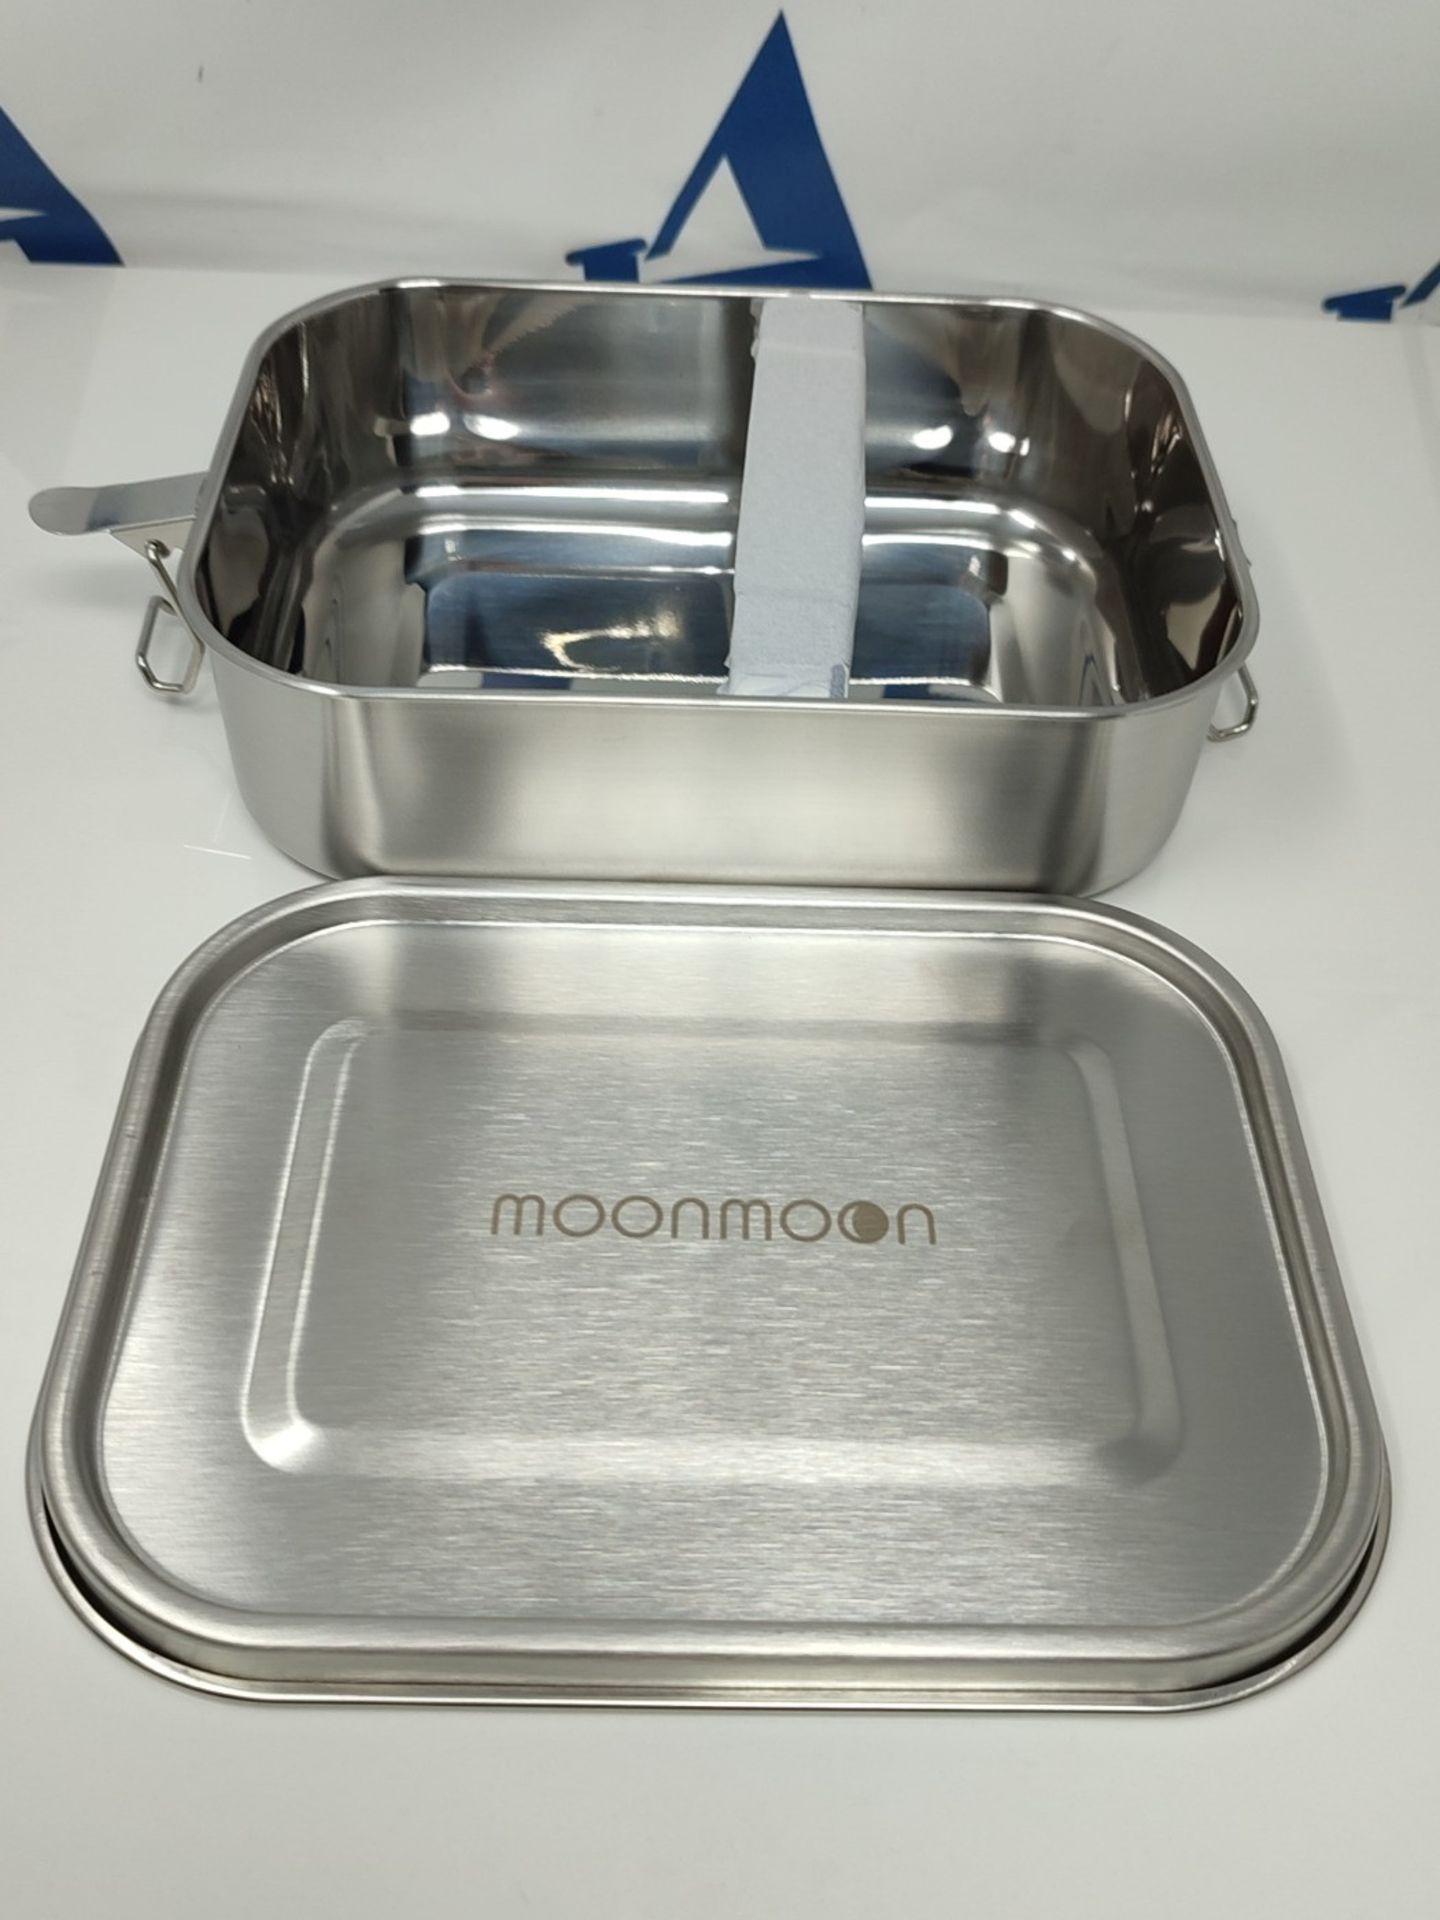 Moonmoon Stainless Steel Lunch Box | Eco-Friendly 1.2 Litre Leakproof Bento Box with c - Image 11 of 12